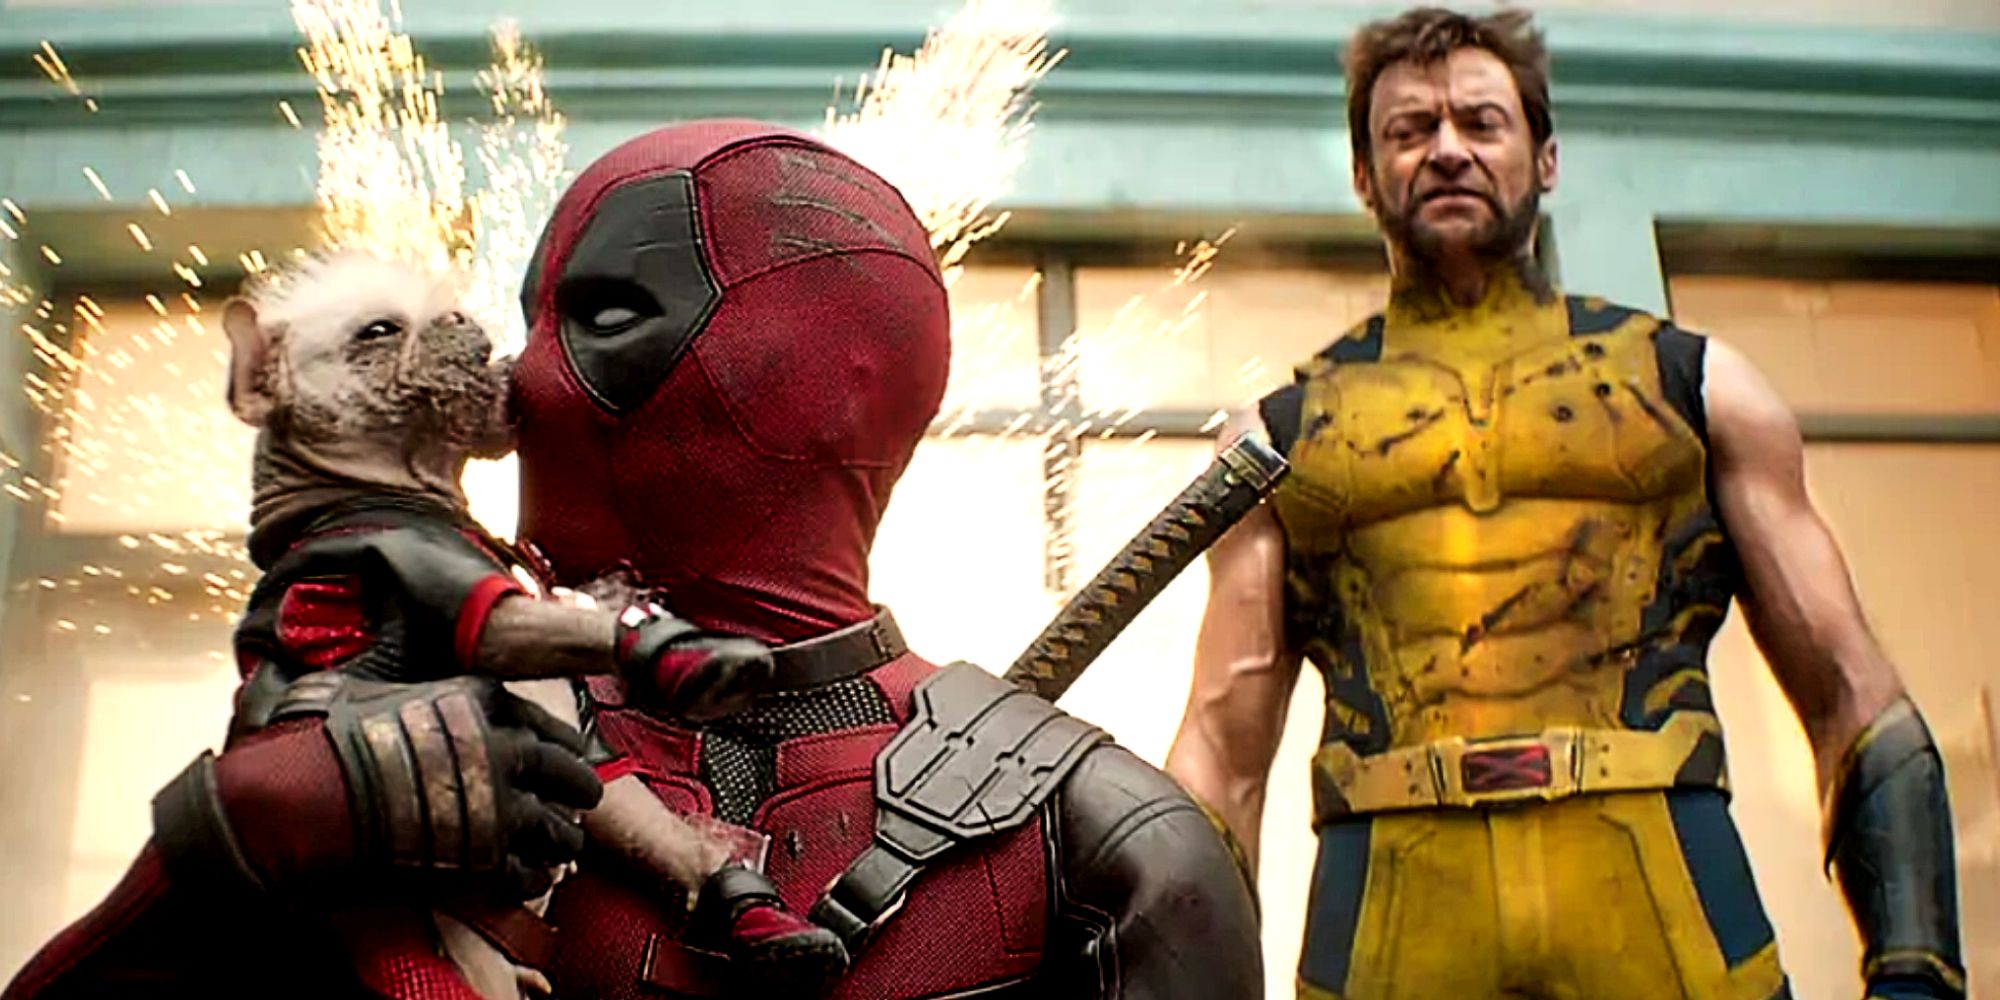 Wade Wilson Holds Dogpool while Wolverine Watches in the Deadpool & Wolverine Trailer